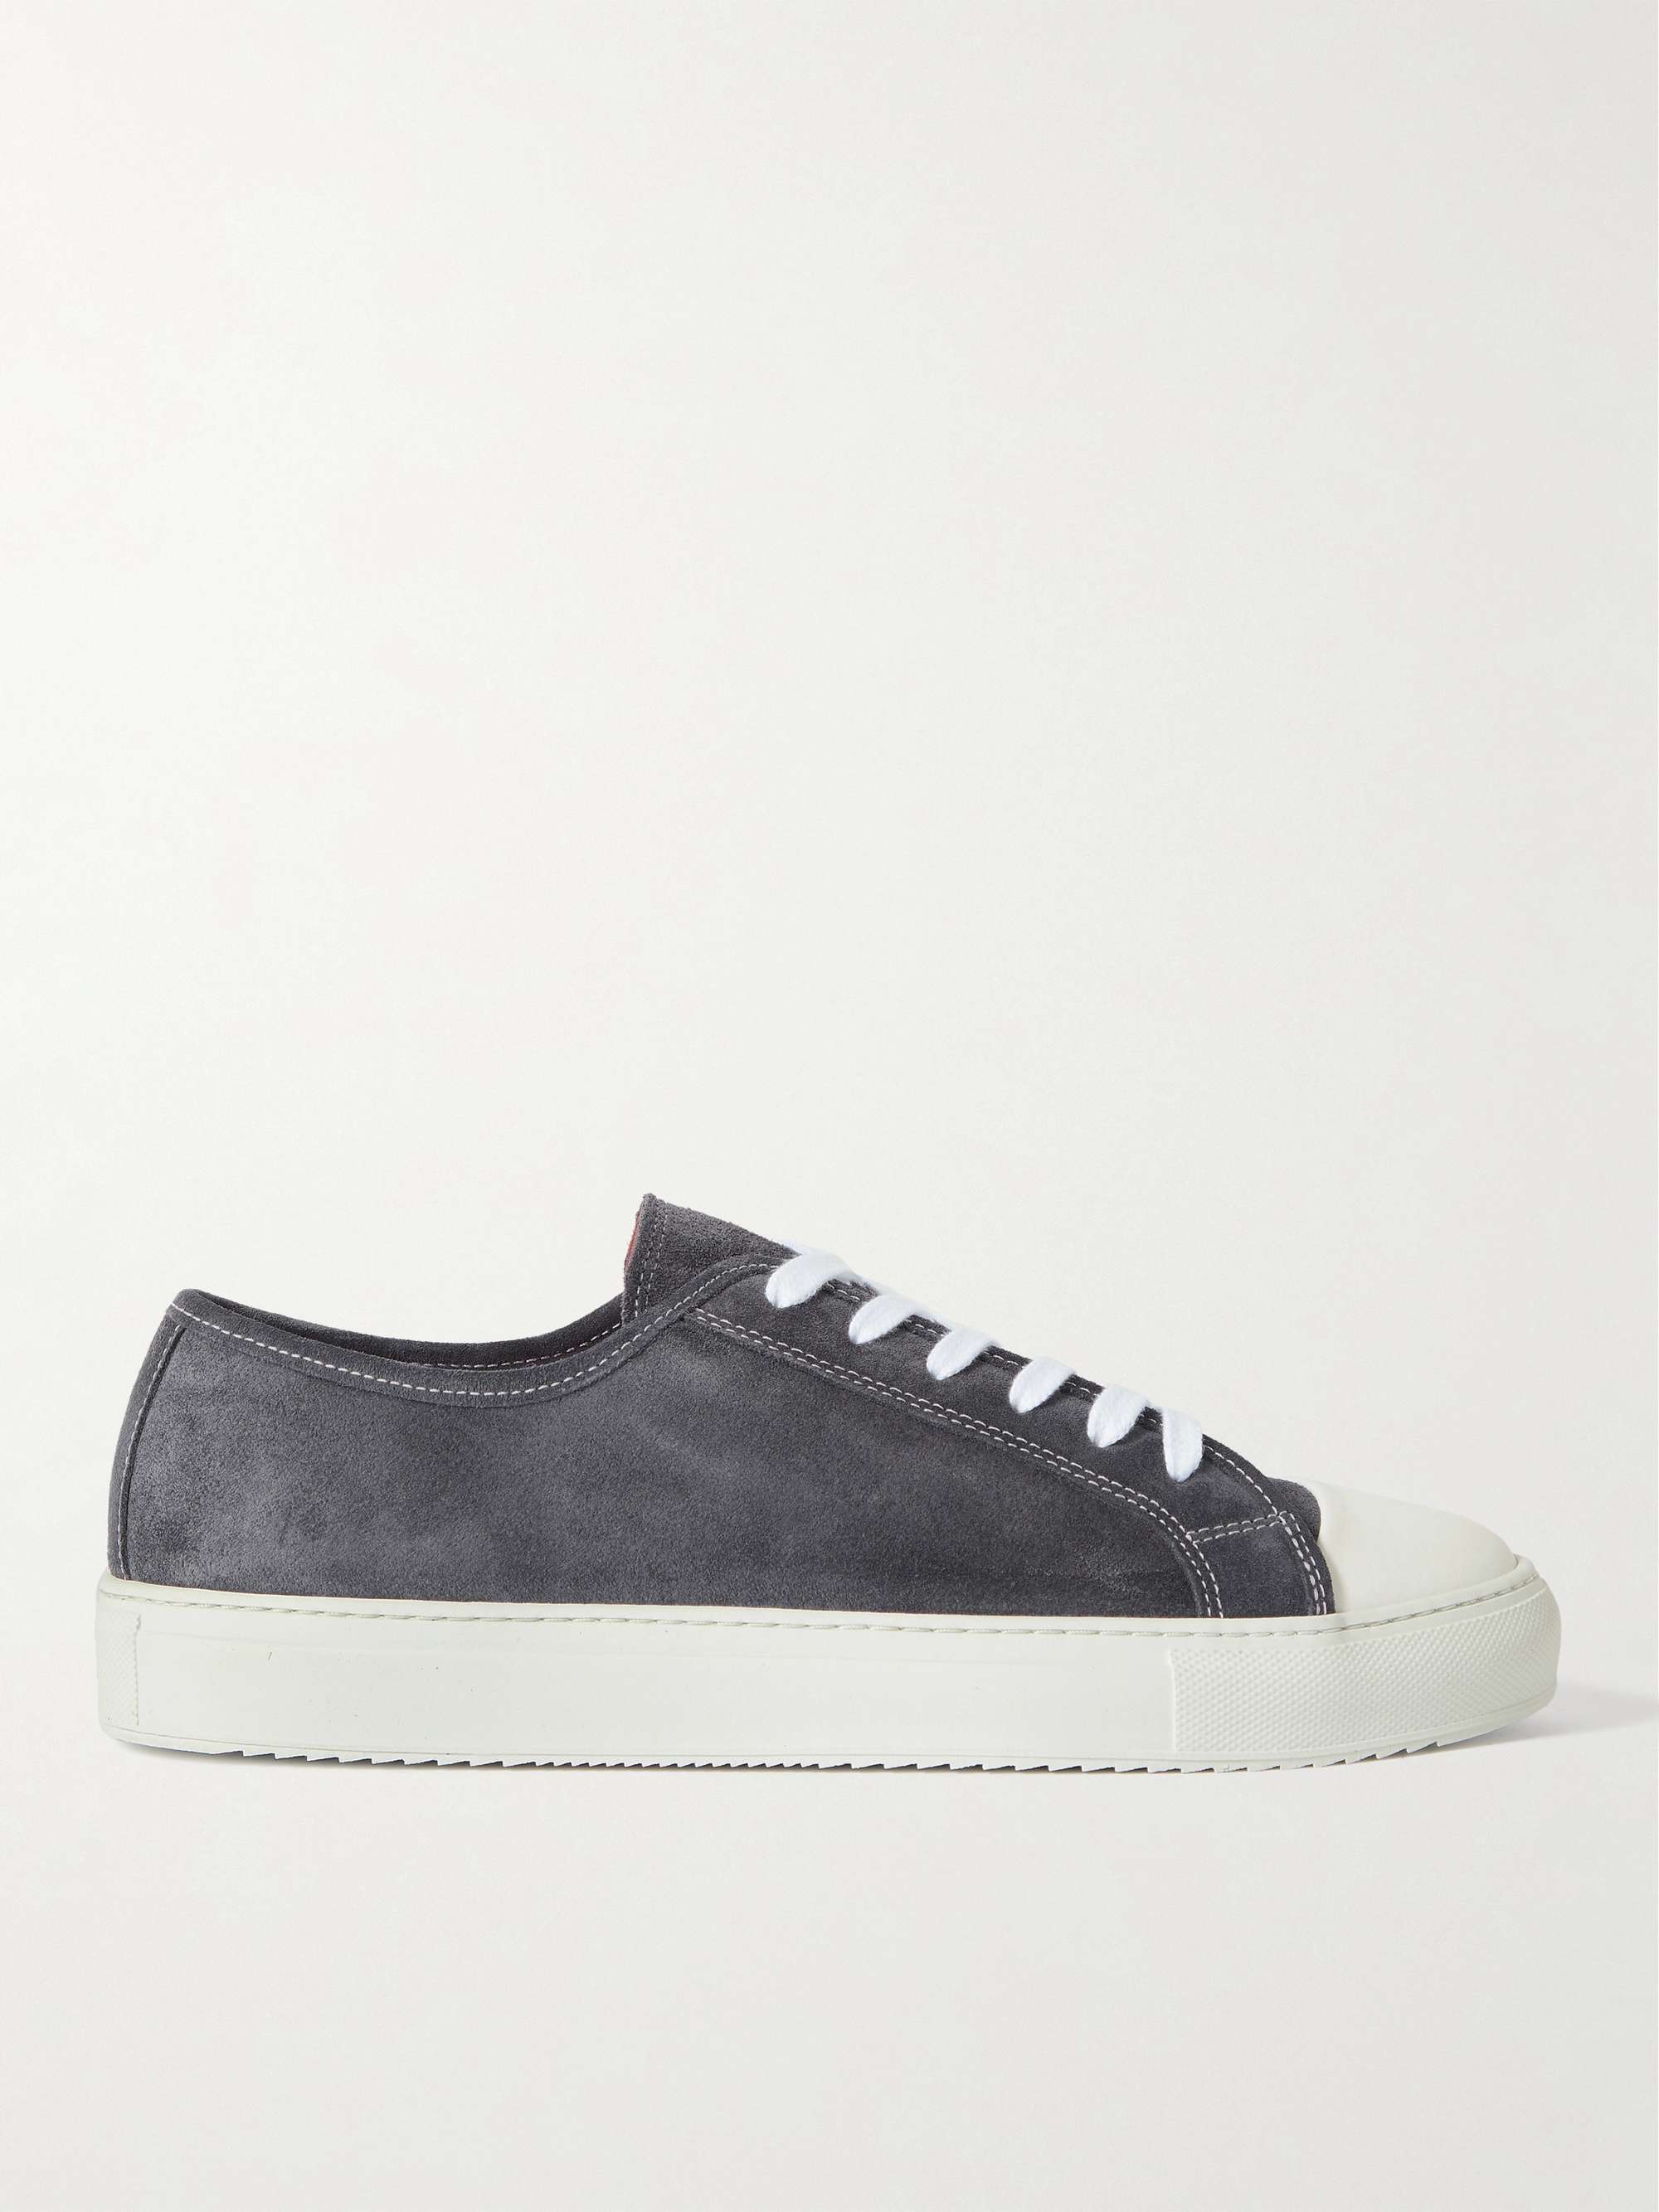 MR P. Larry Regenerated Suede by evolo® Sneakers for Men | MR PORTER